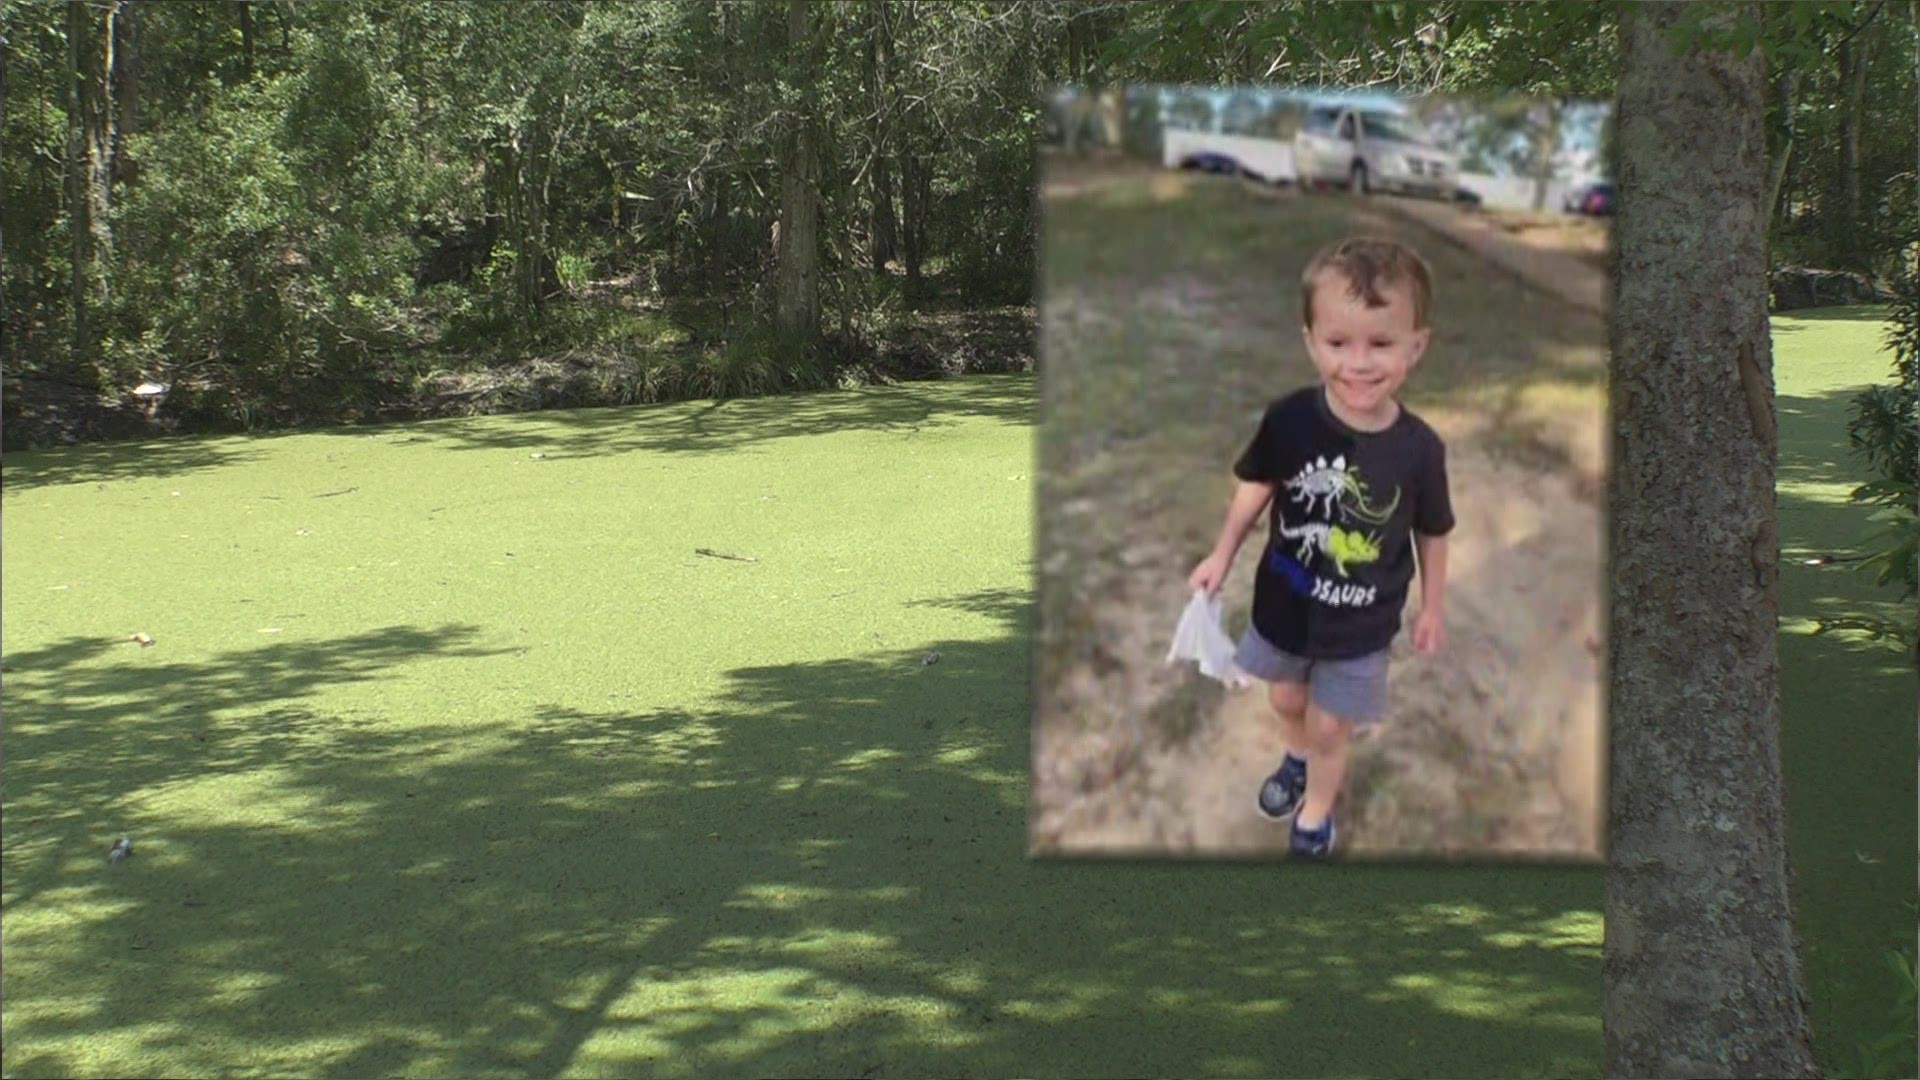 The search for the 4-year-old that slipped into the water in Jean Lafitte has been called after a week-long  effort.